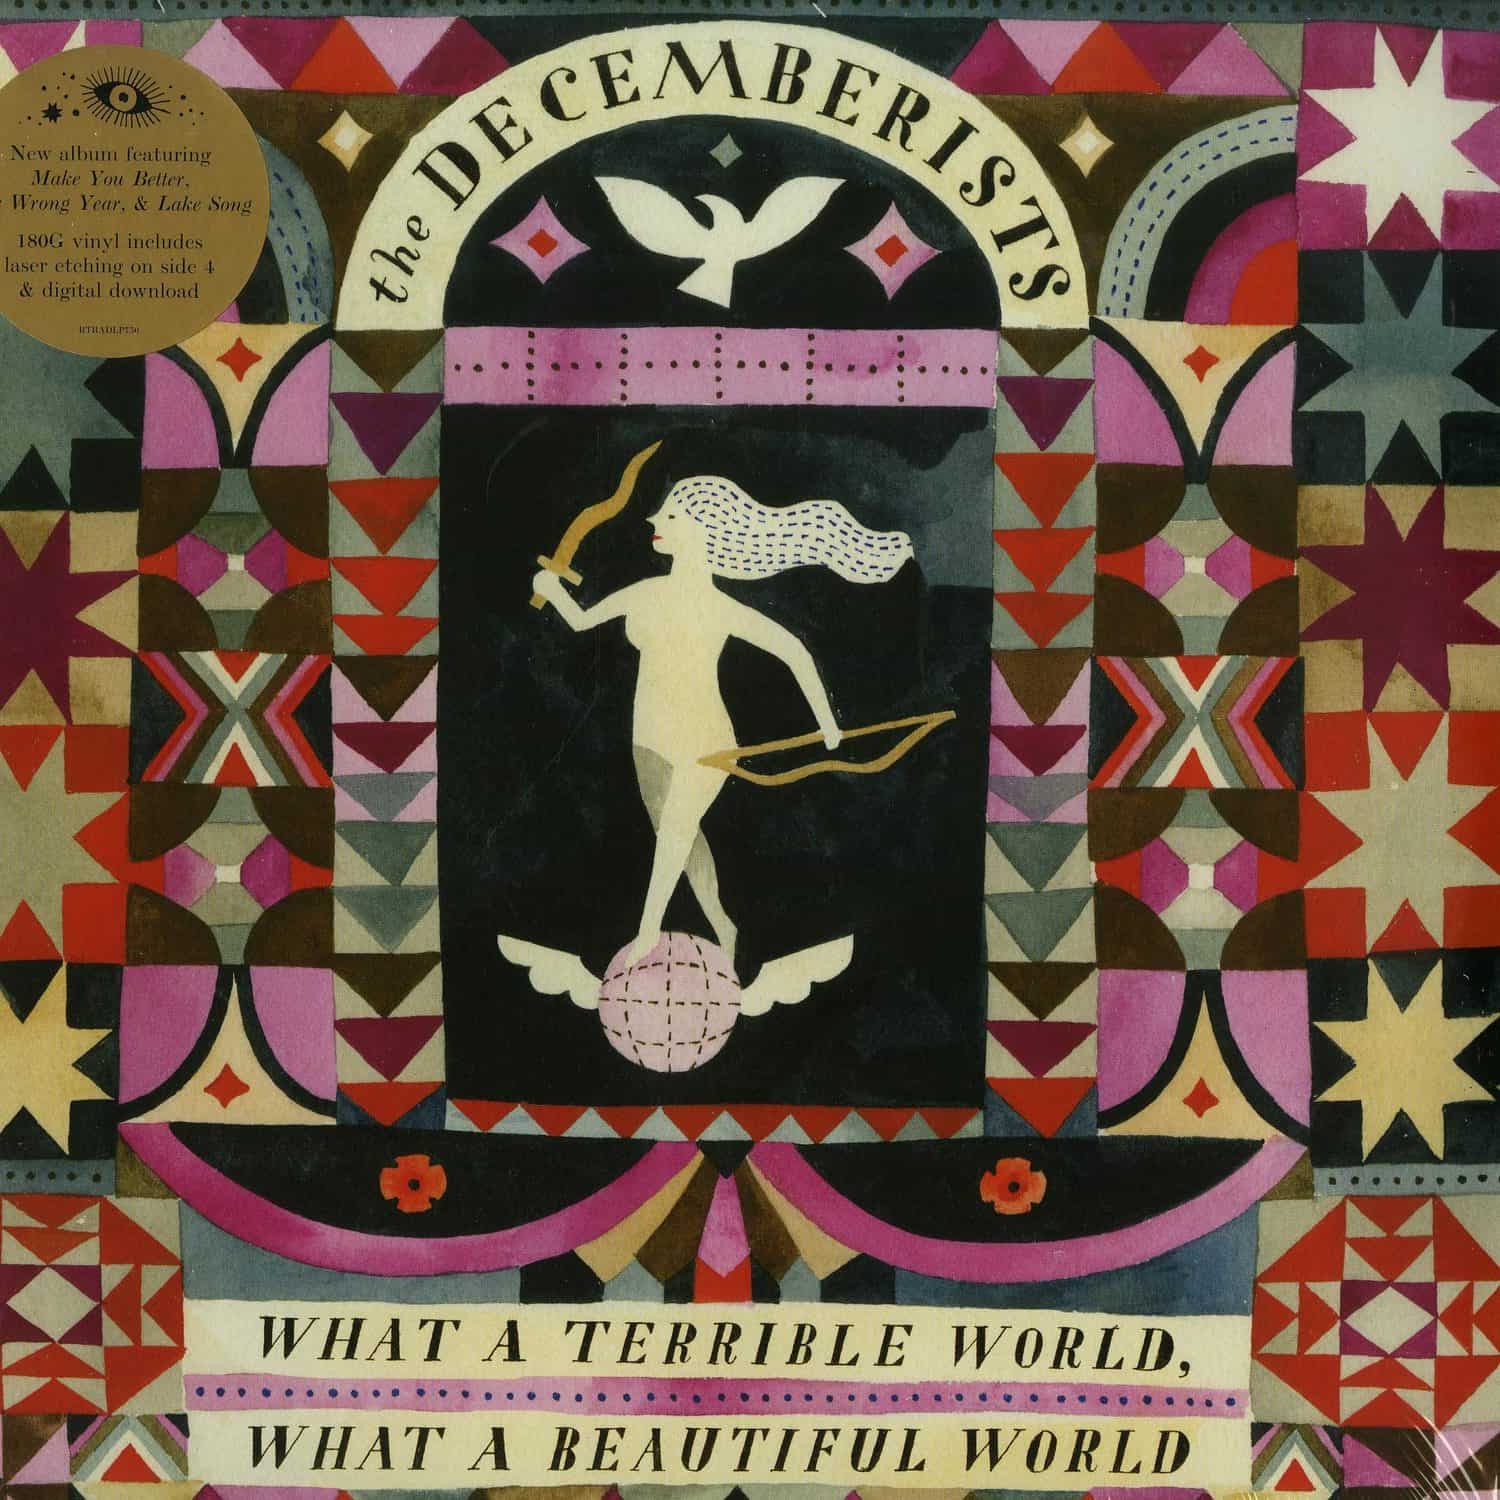 The Decemberists - WHAT A TERRIBLE WORLD, WHAT A BEAUTIFUL WORLD 